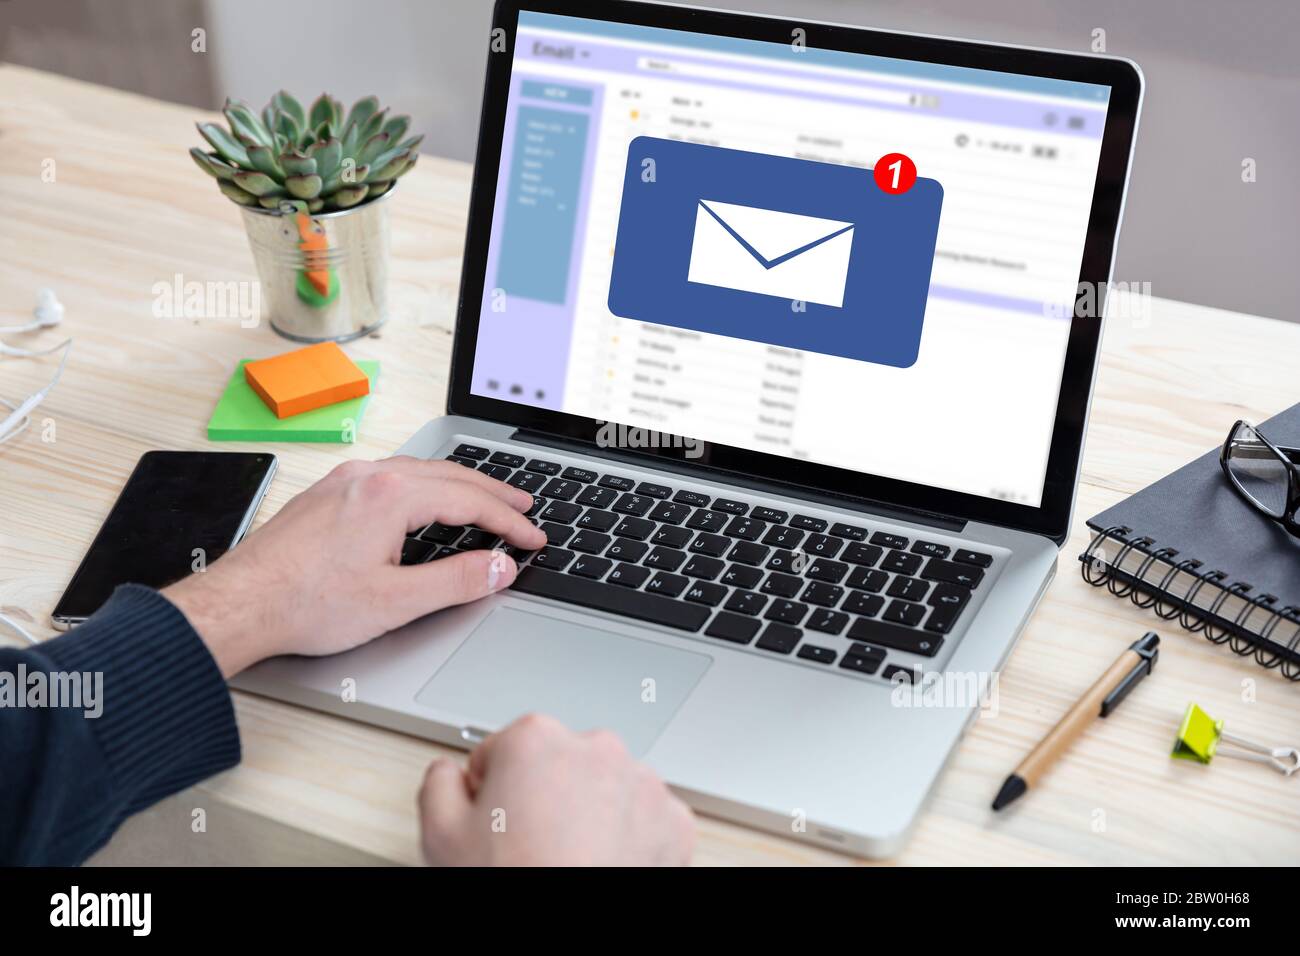 Email notification concept, man working with a computer laptop, one new inbox e mail message on the screen, business office desk background Stock Photo